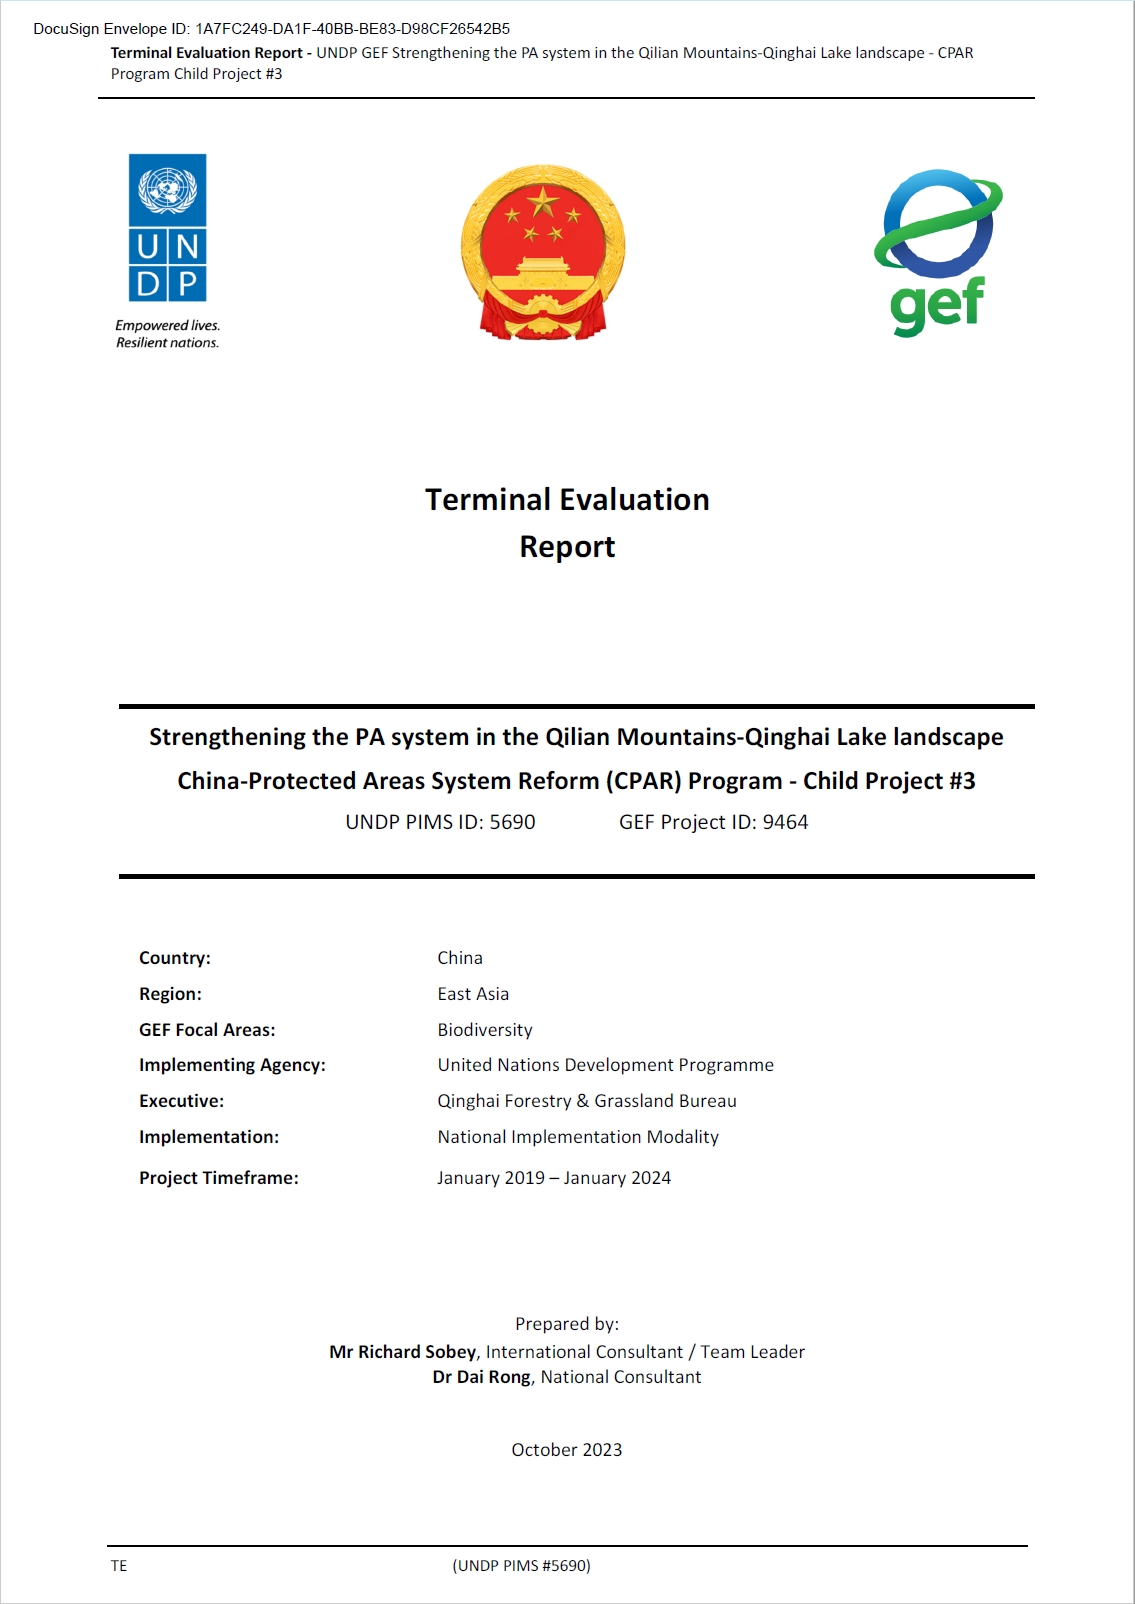 Terminal Evaluation for the China's Protected Area Reform (C-PAR) 3 (PIMS 5690)